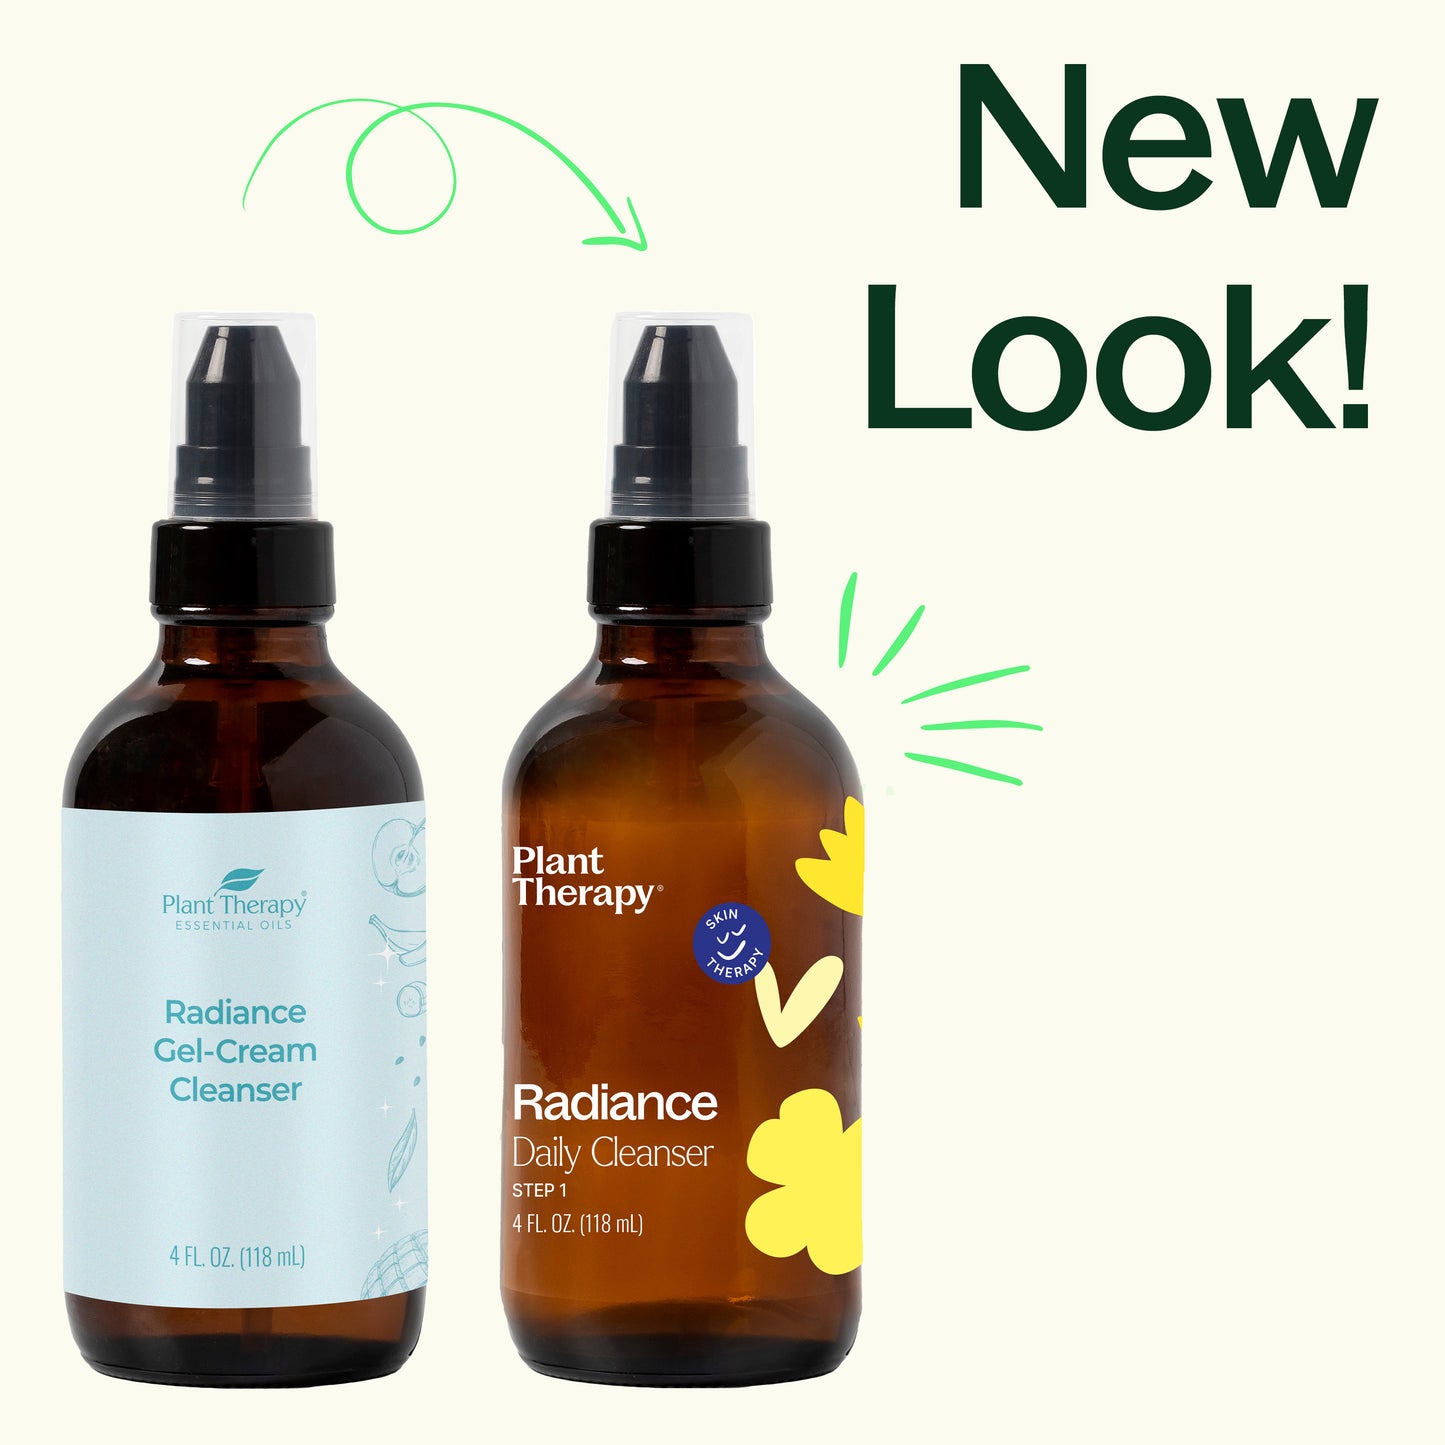 Radiance Daily Cleanser New Look